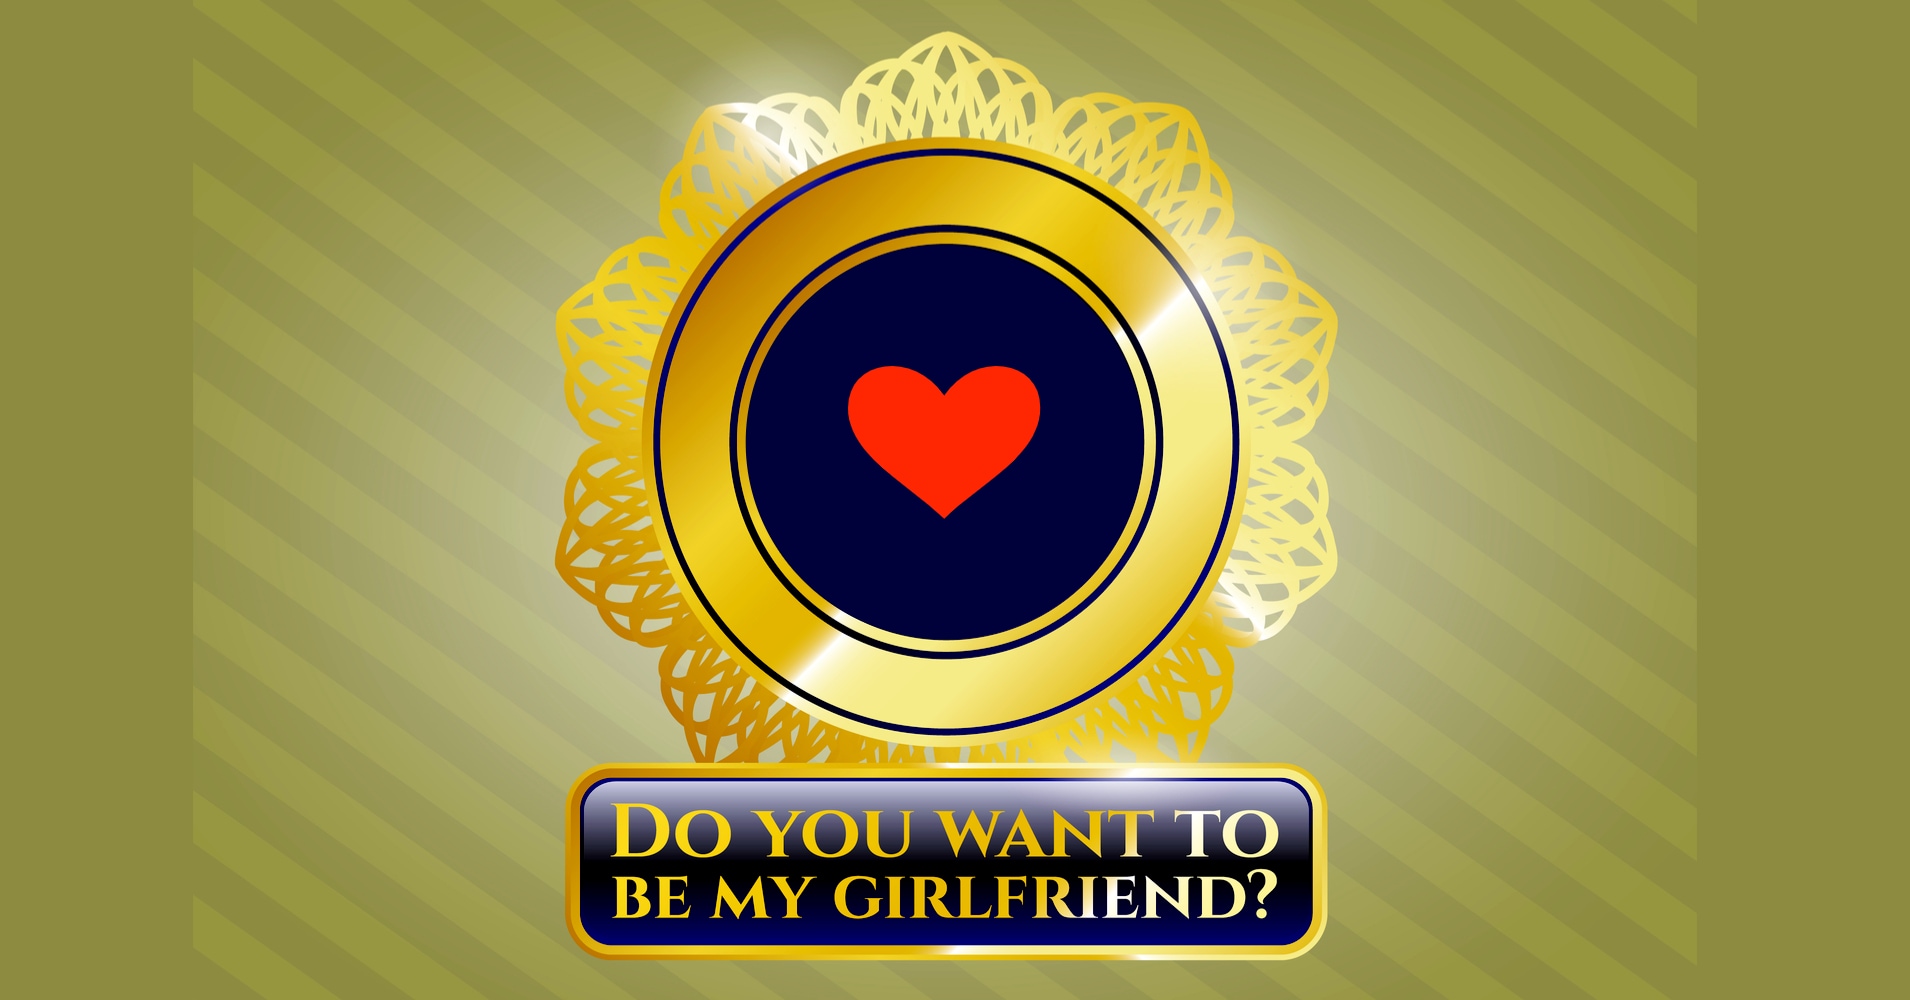 Should I Ask Her To Be My Girlfriend   Quiz   Quizony.com